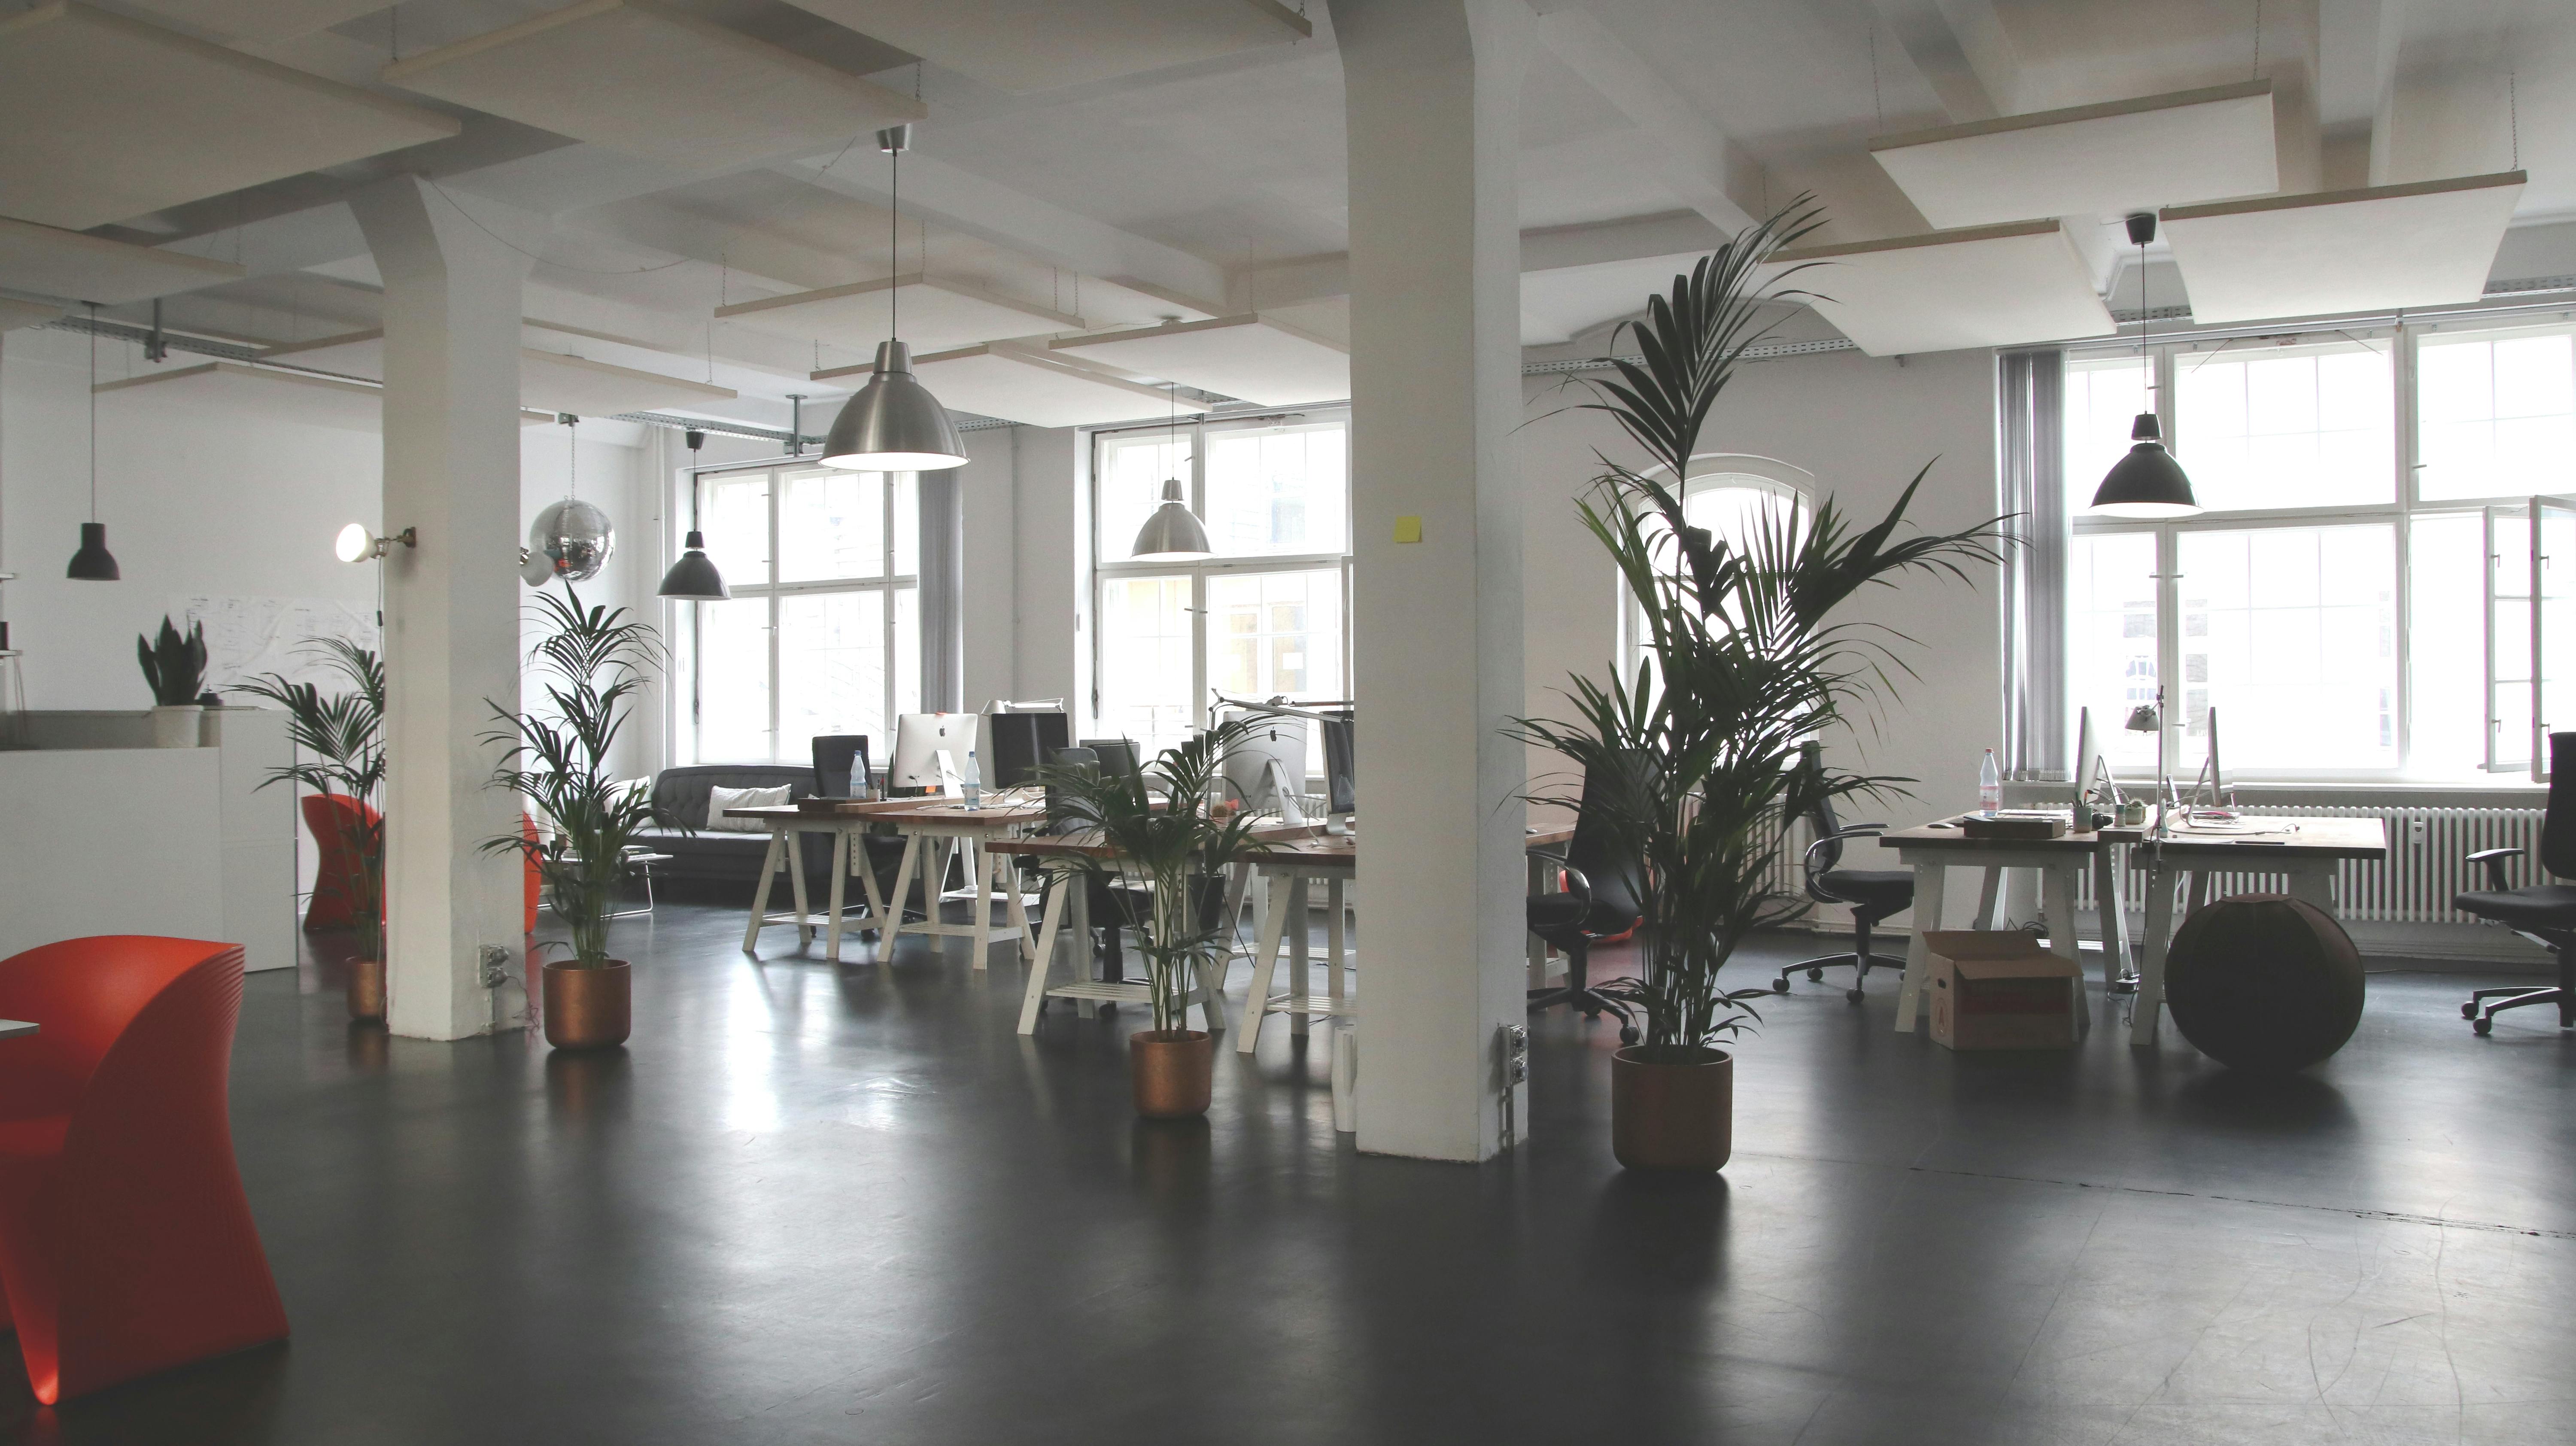 Renting Work Spaces Can Help You Redefine Your Work Environment